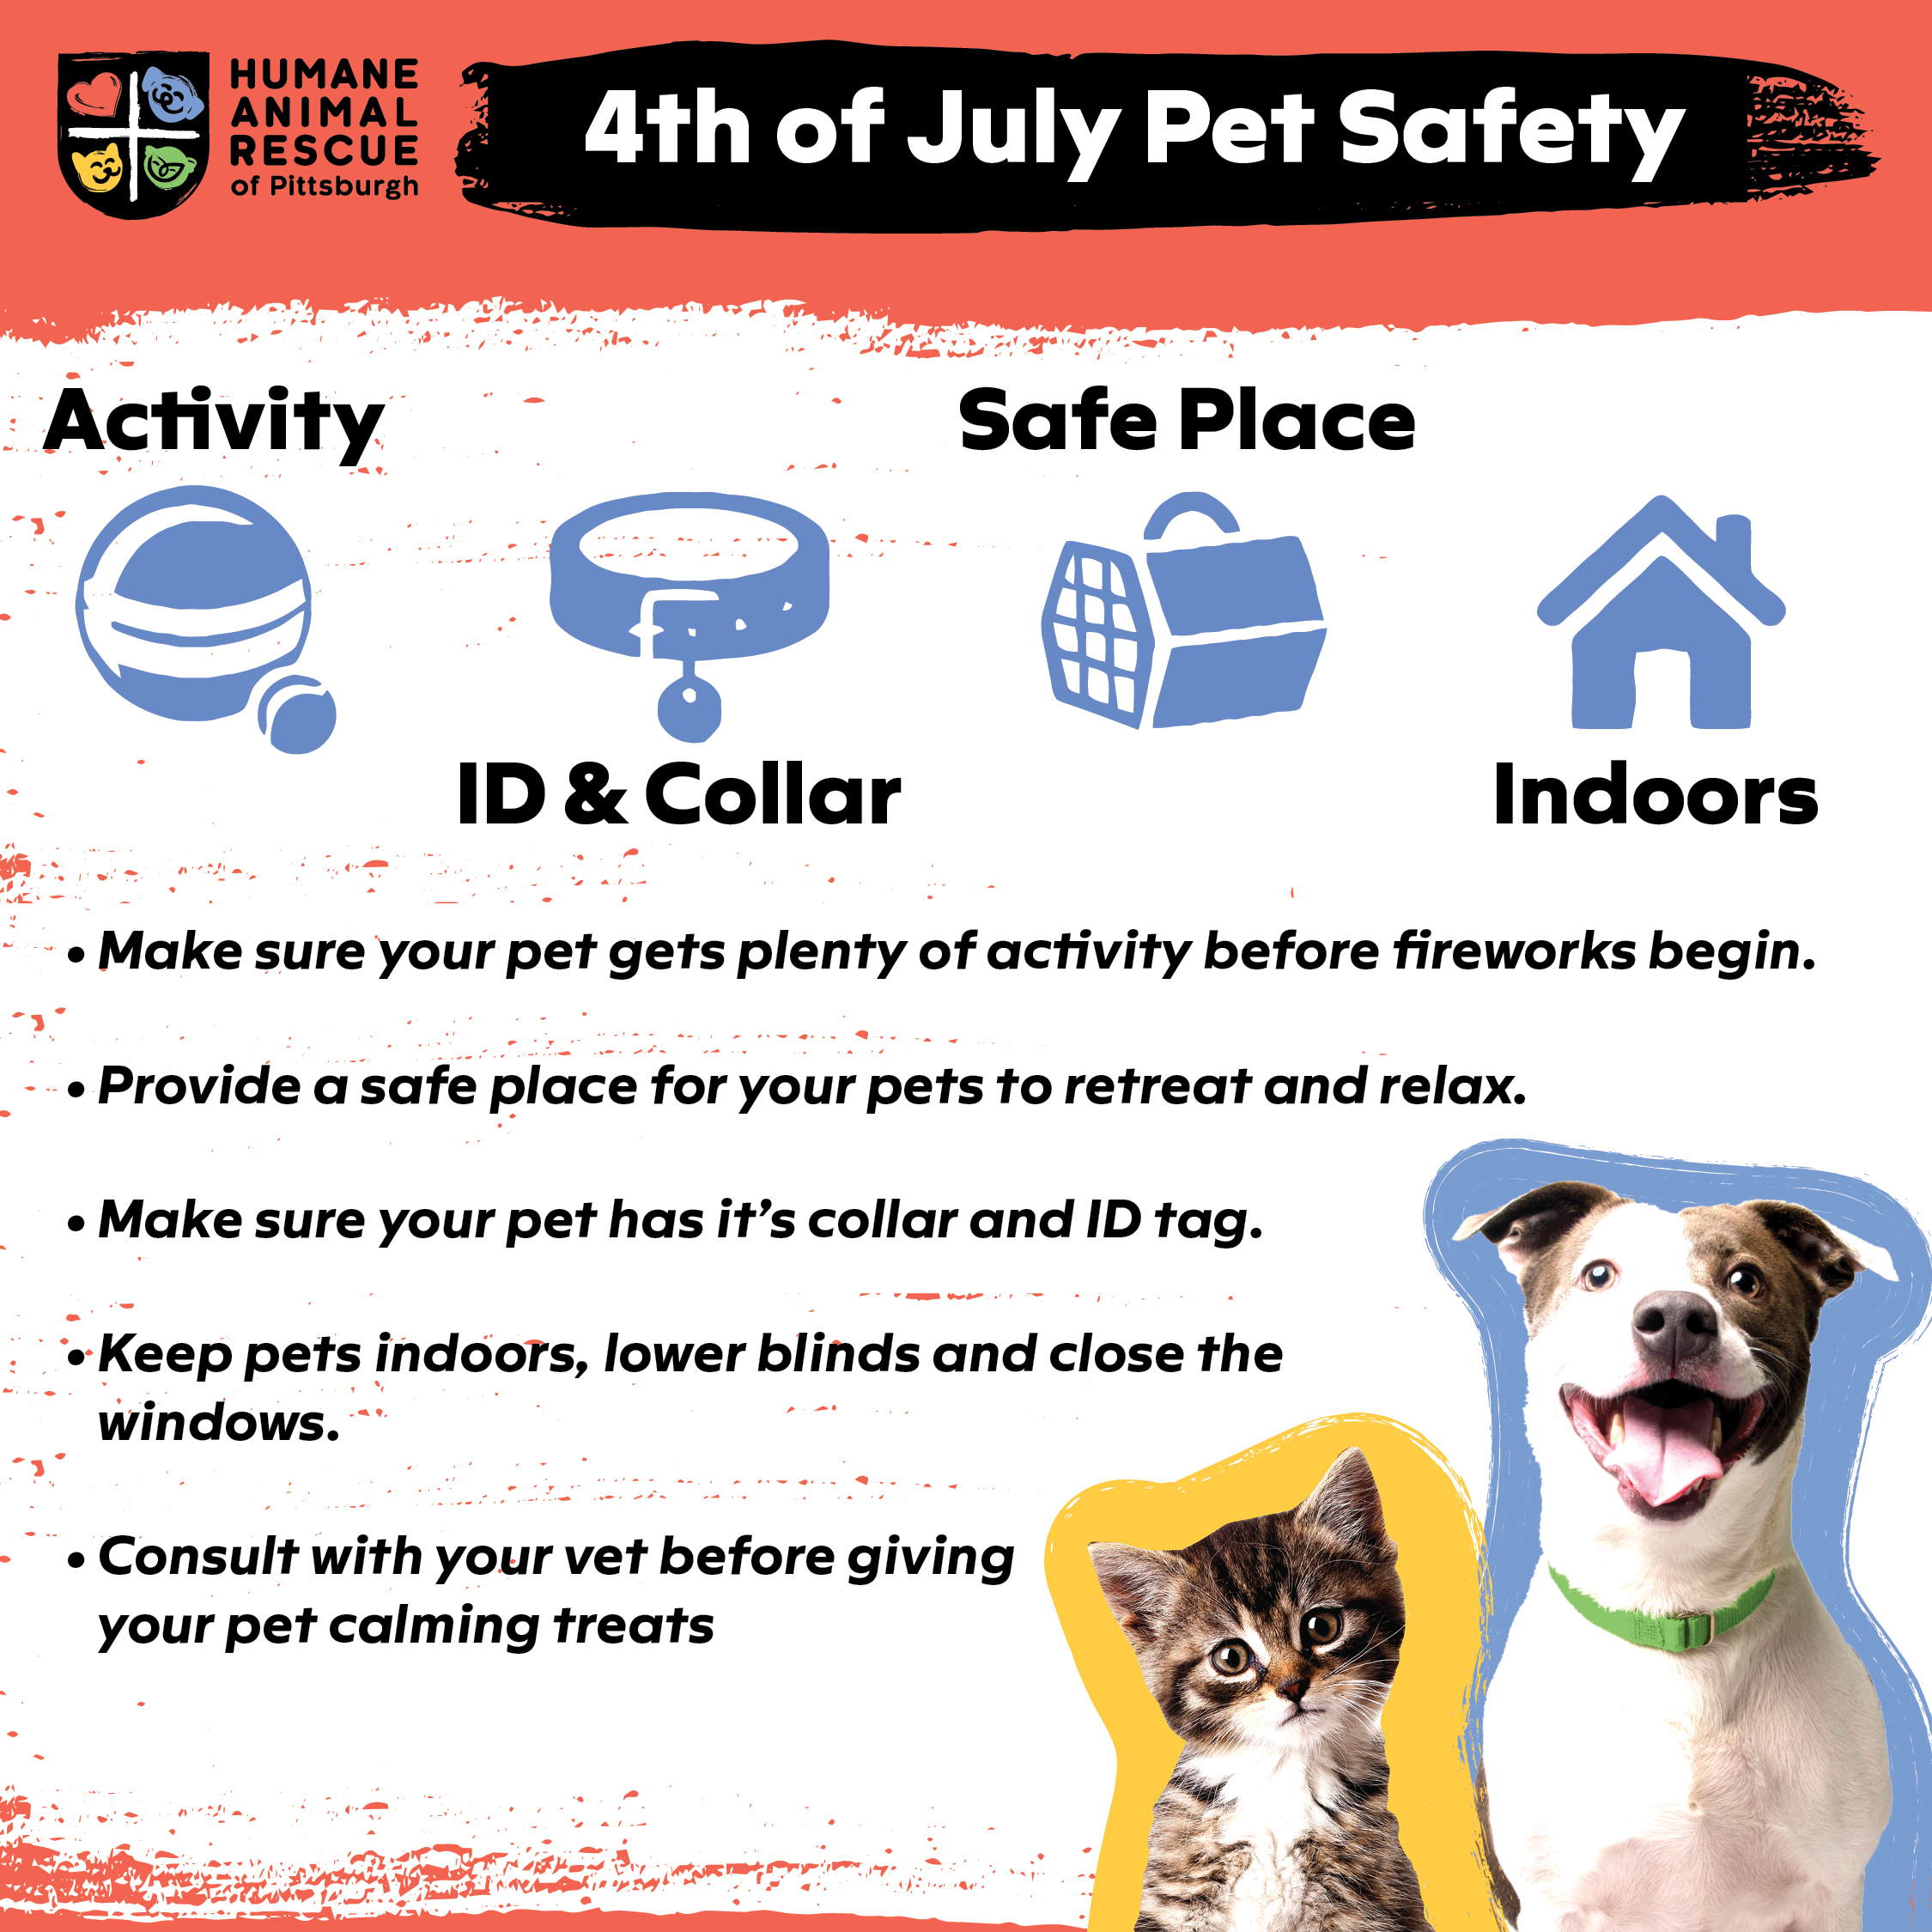 Fourth of July Pet Safety - Humane Animal Rescue